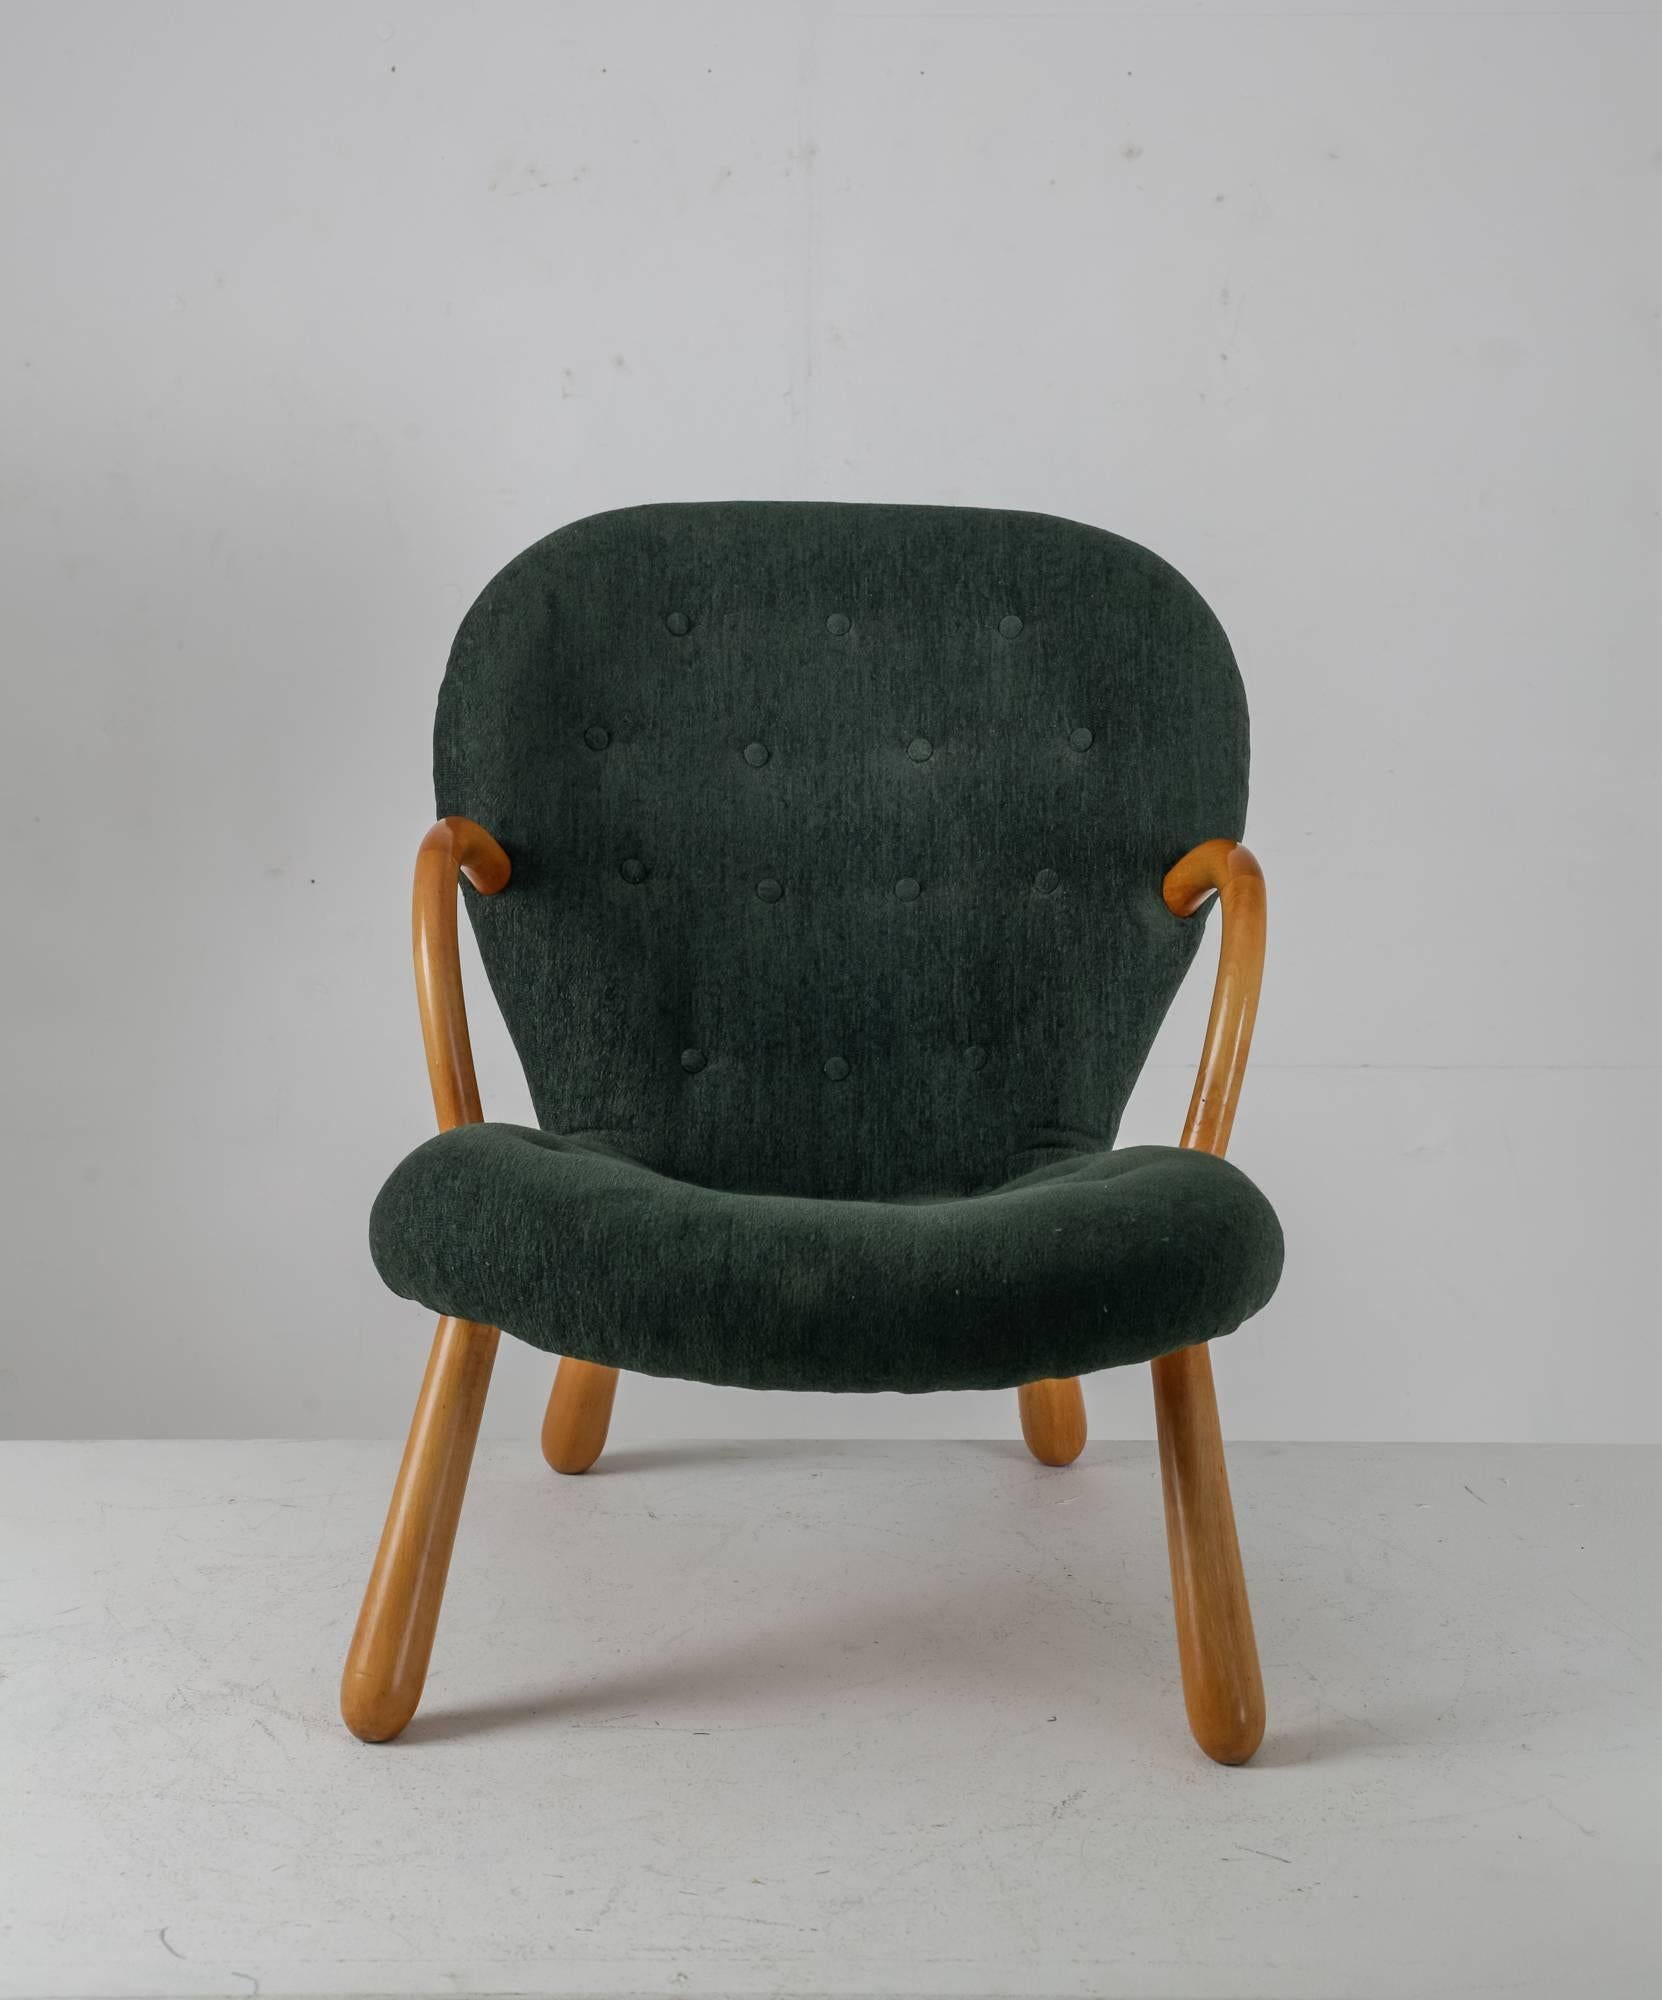 A Musling (clam) chair by Philip Arctander. The chair is made of a lacquered beech frame and a dark green upholstery. The wooden armrests are molded and the legs are rounded, giving the chair an organic shape and the inspiration for its